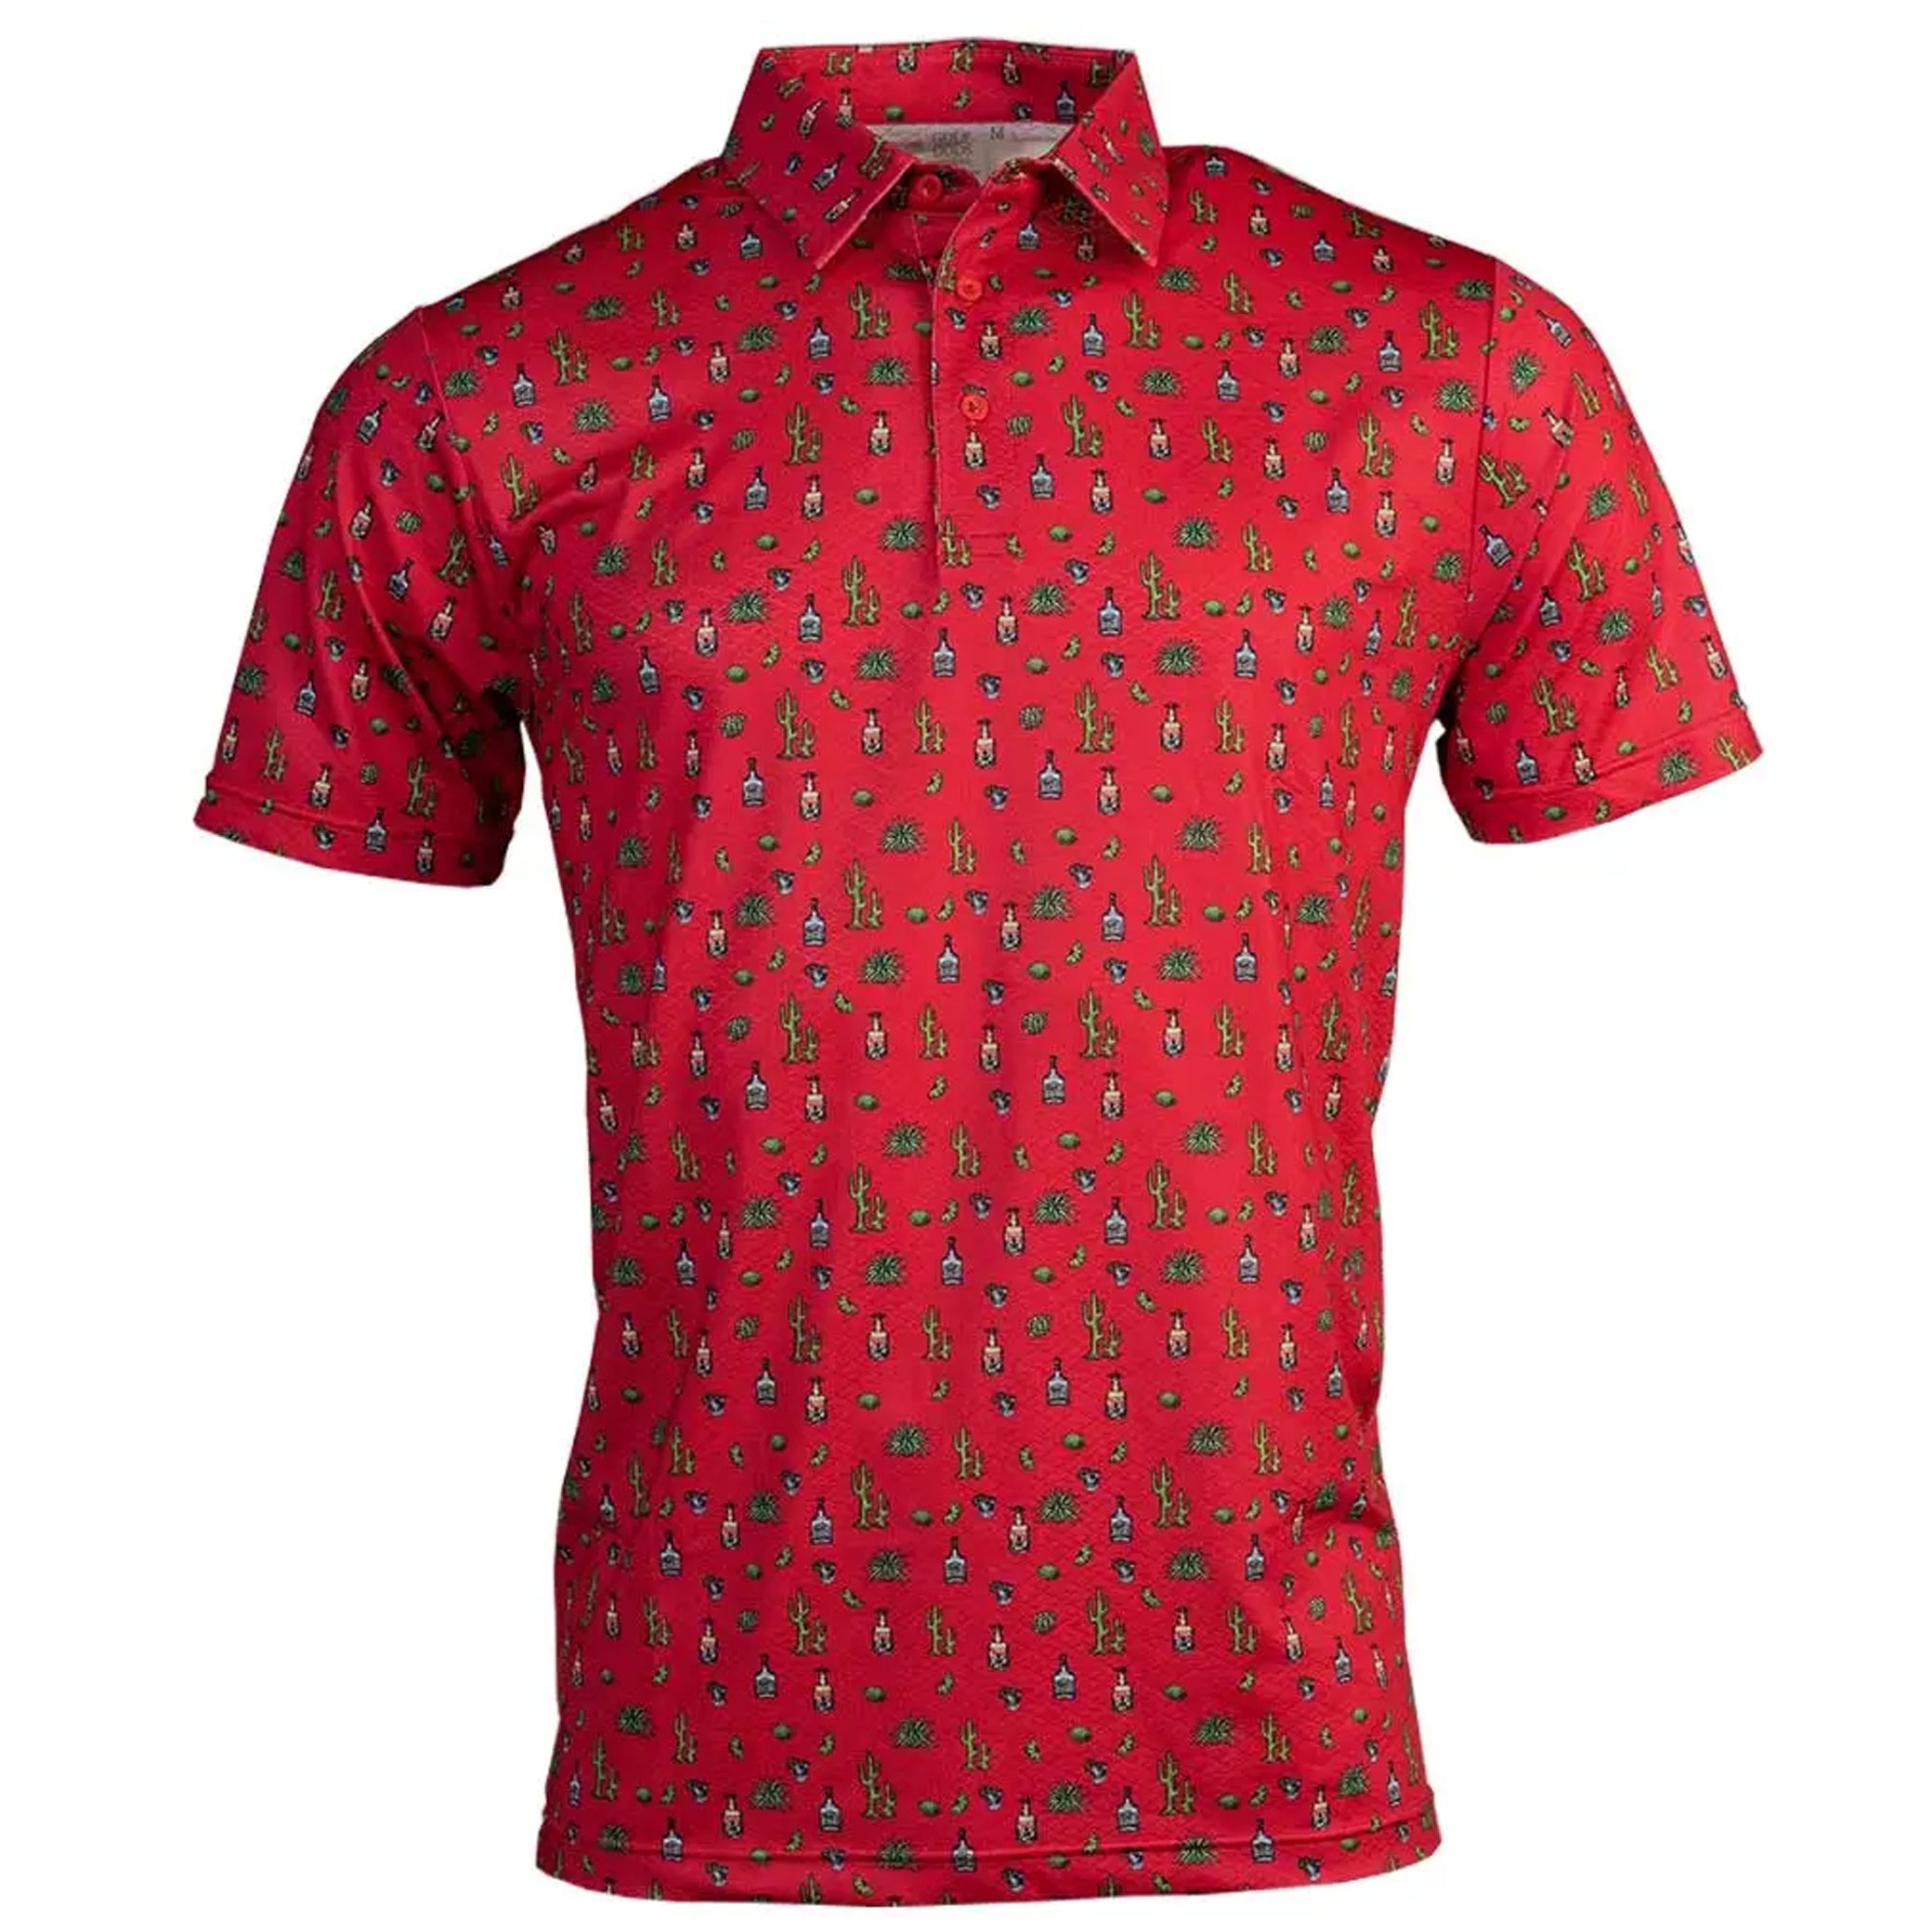 Men's Golf Shirts - Buy Men's Golf Shirts for a Stylish & Comfy Look — The  House of Golf